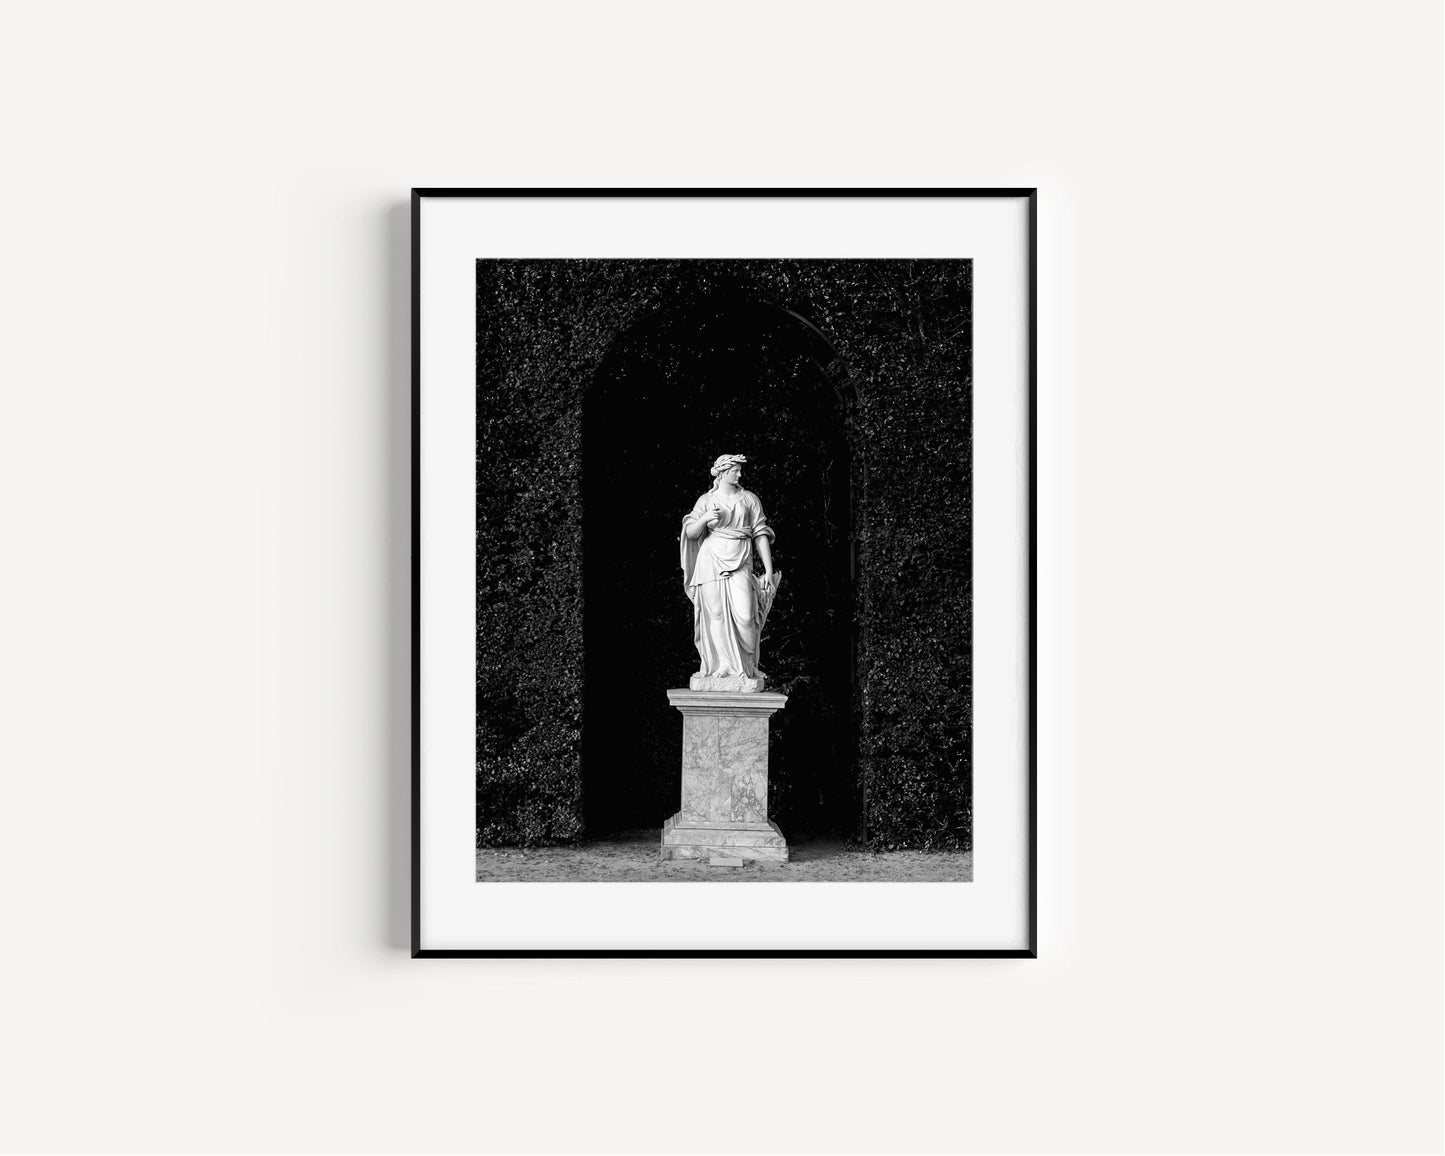 Black and White Gardens of Versailles Statue Photography Print - Departures Print Shop